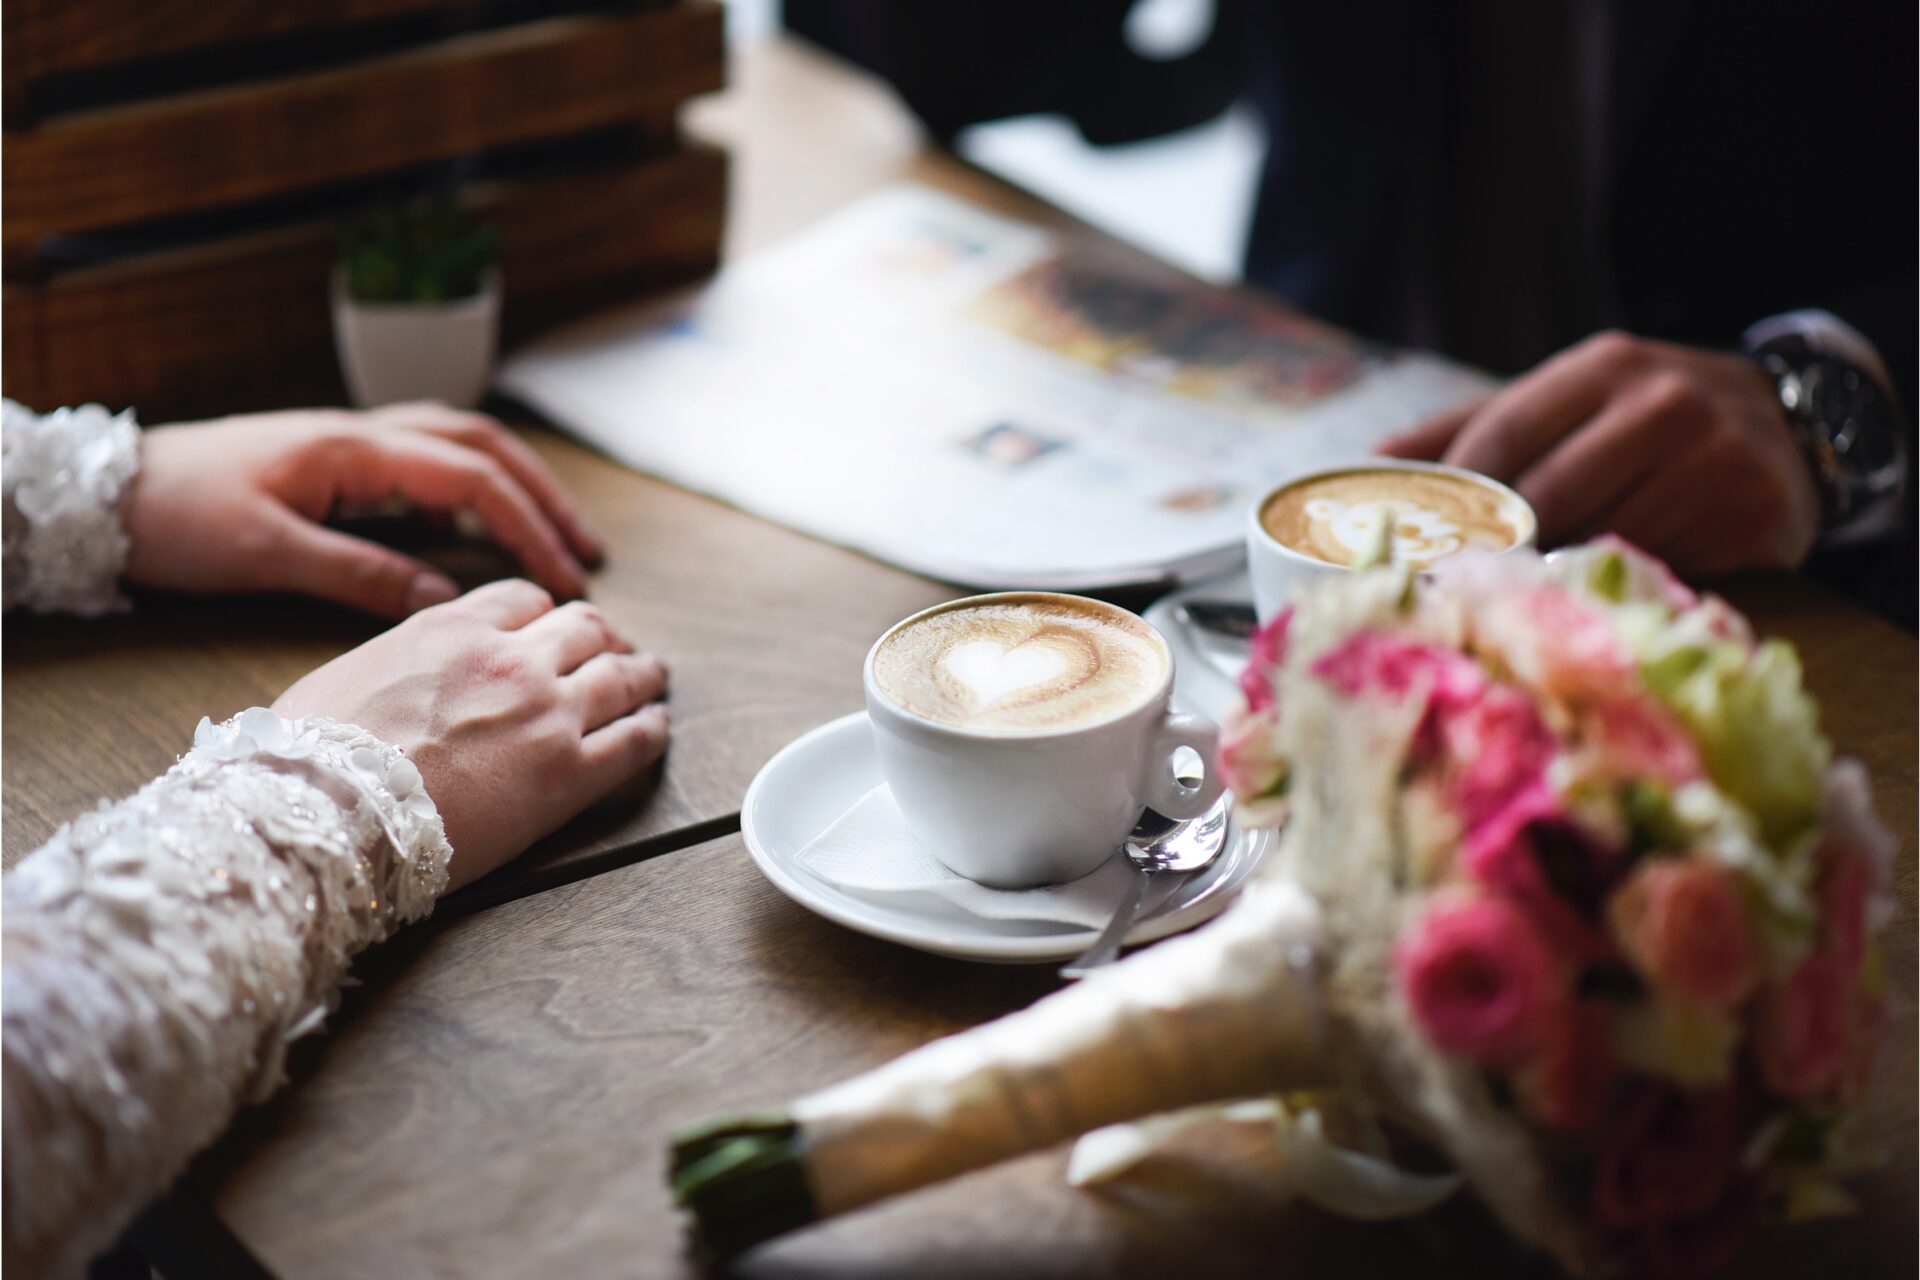 A Latte Nerve: Indianapolis Coffee Shop Bum-Rushed By ‘Pop-Up’ Wedding